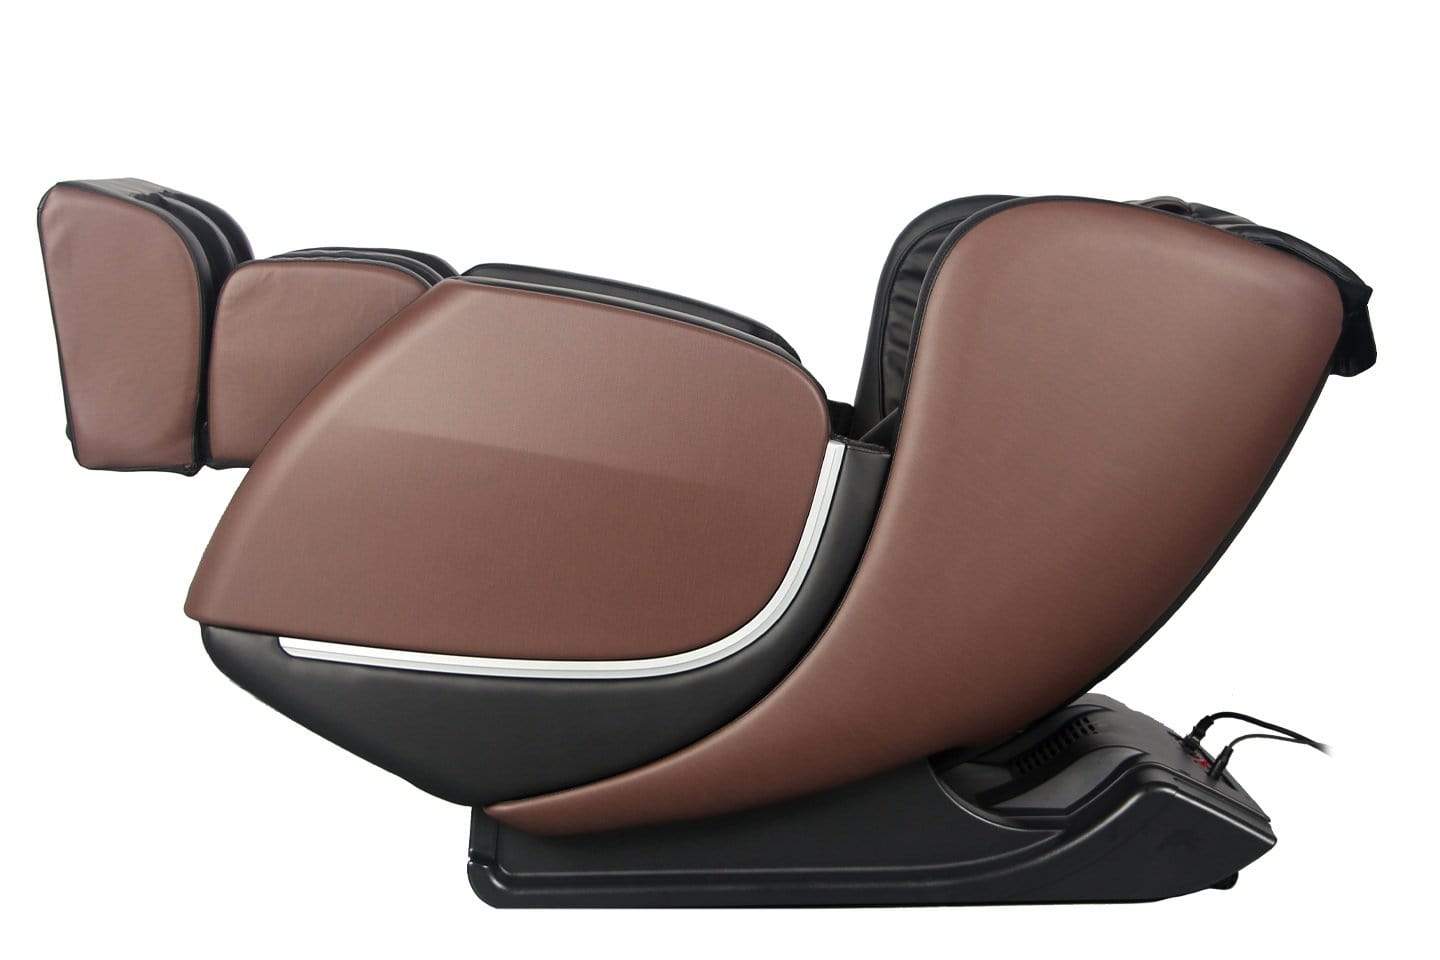 Kyota Massage Chair Brown / Free Curbside Delivery / Free 4 Year Limited Warranty Kyota Kofuko E330 Massage Chair 13150041